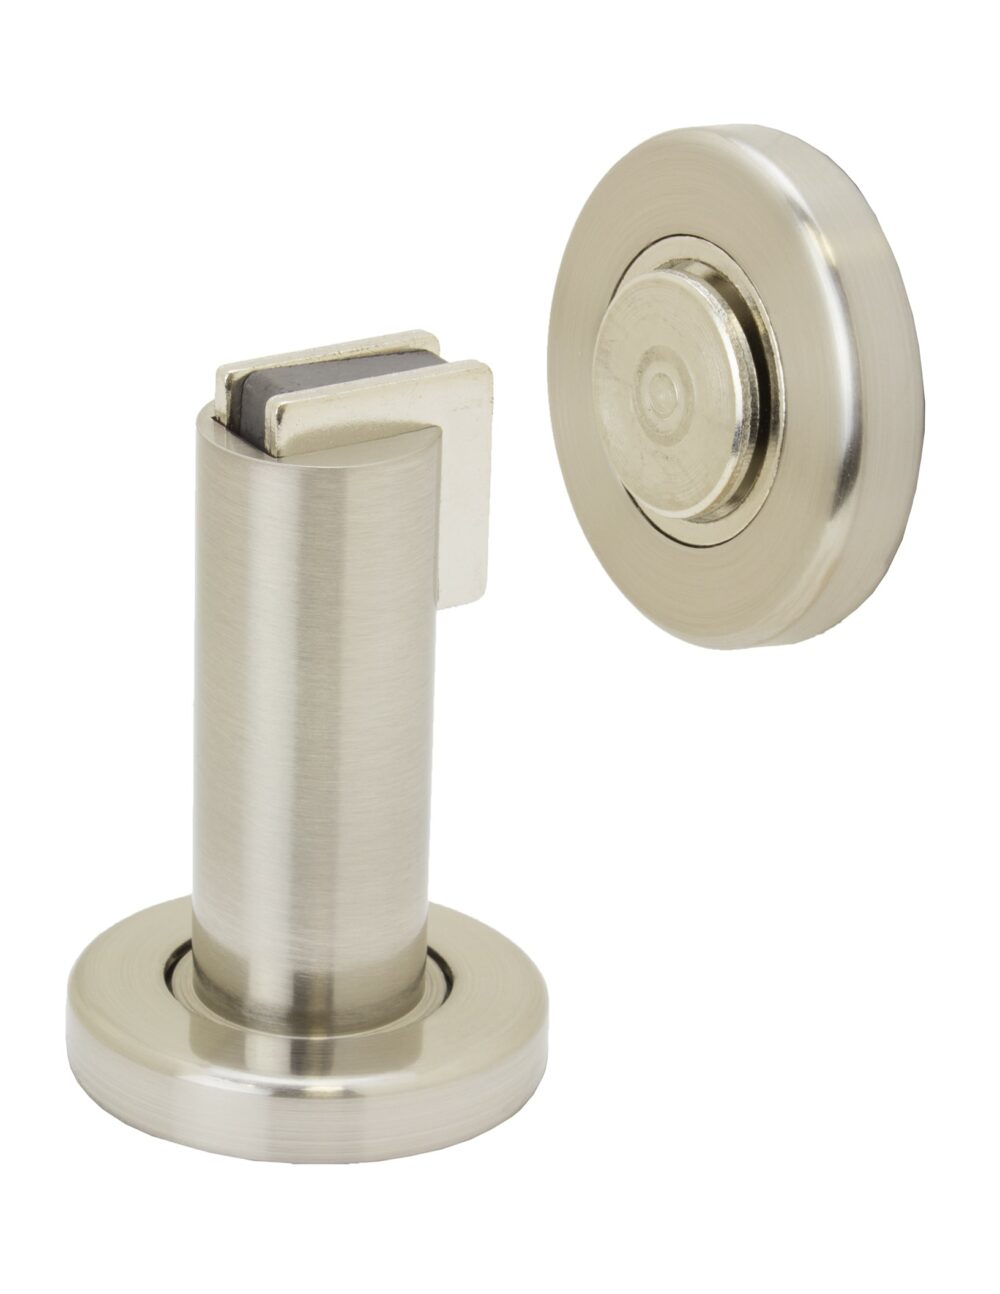 New Polished Brass Magnetic Door Holder stop stoppers 